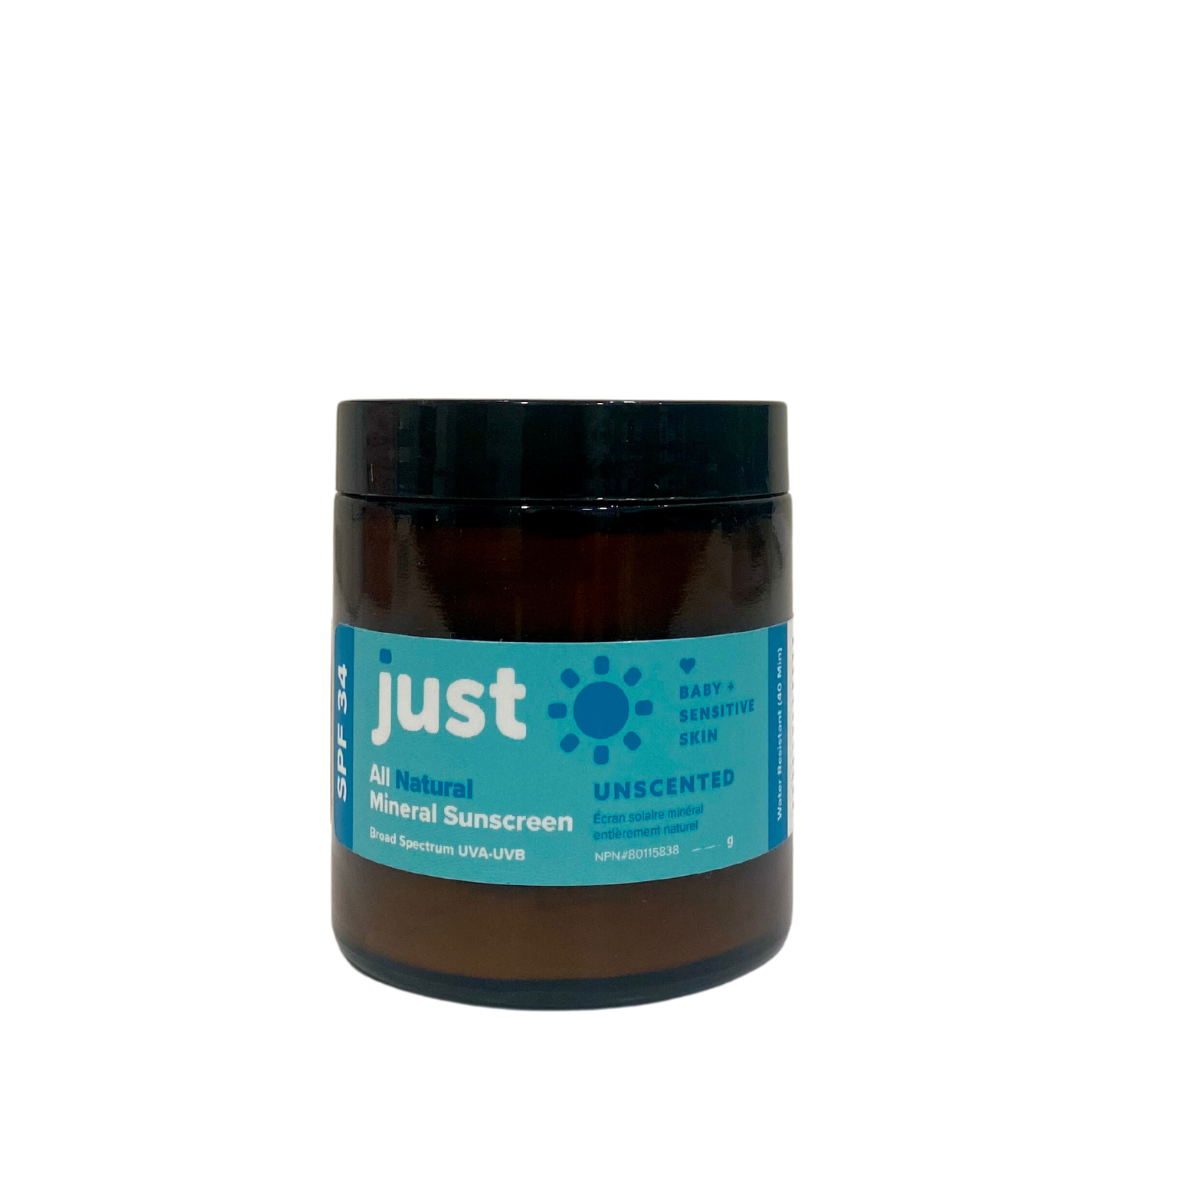 Just Sun Unscented Mineral Body Sunscreen SPF 34